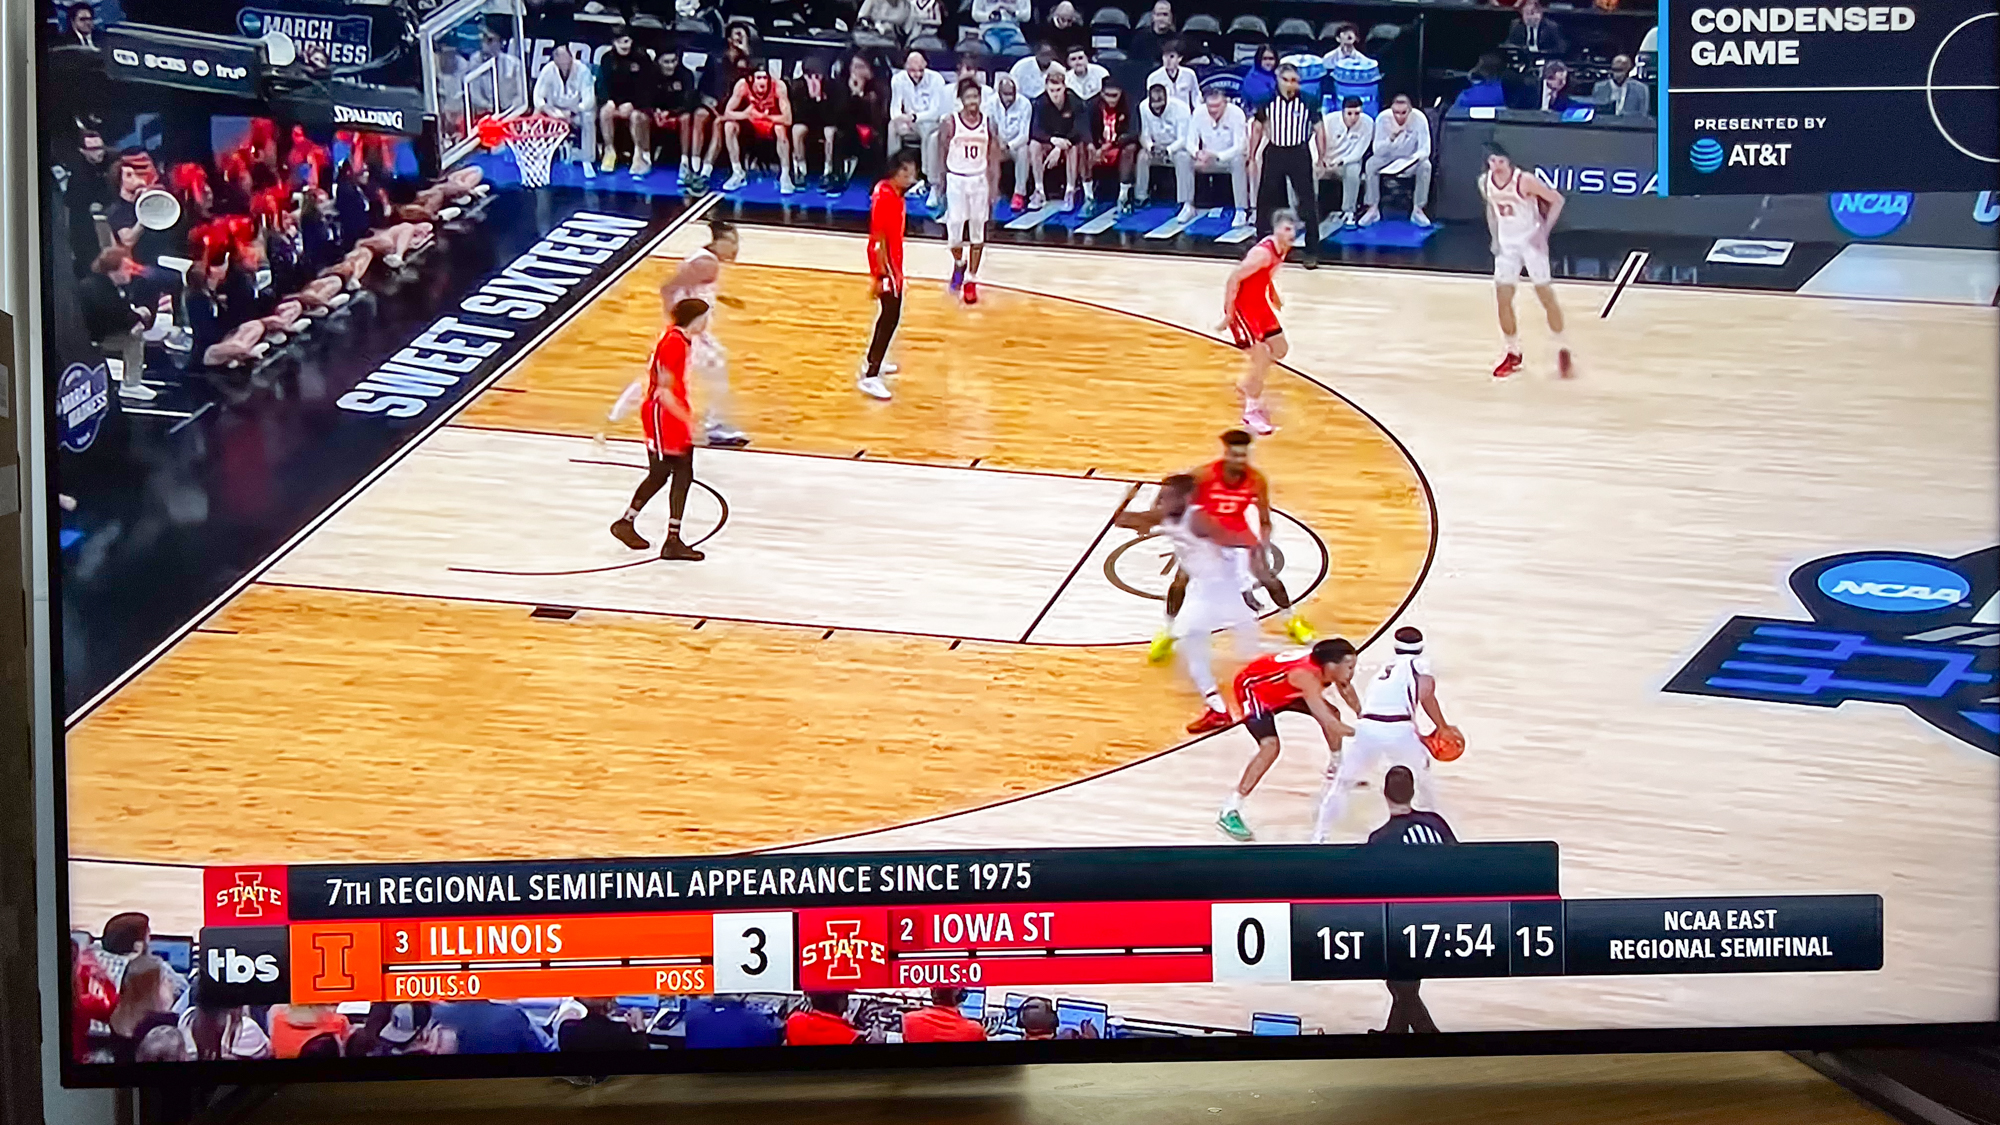 The Sony XR X90L showing a March Madness NCAA basketball game